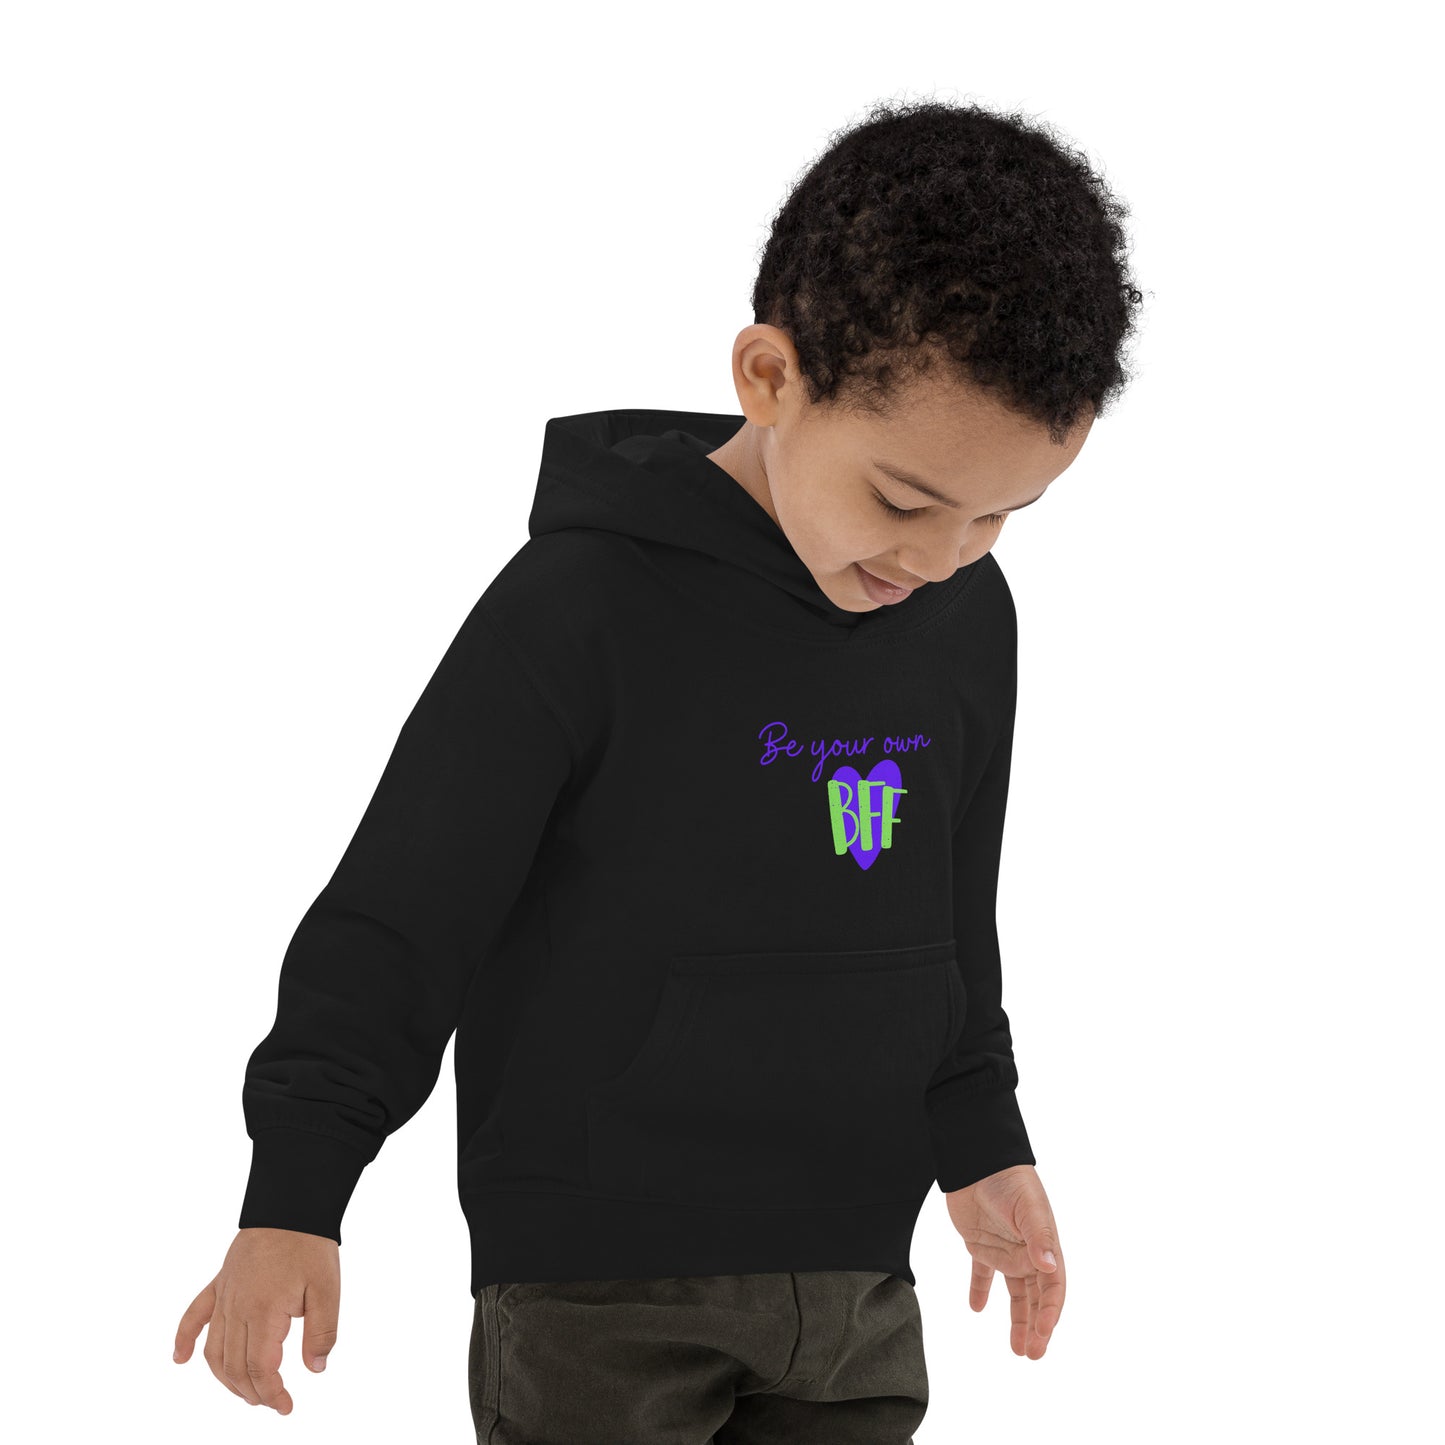 Kids Hoodie - Be Your Own BFF